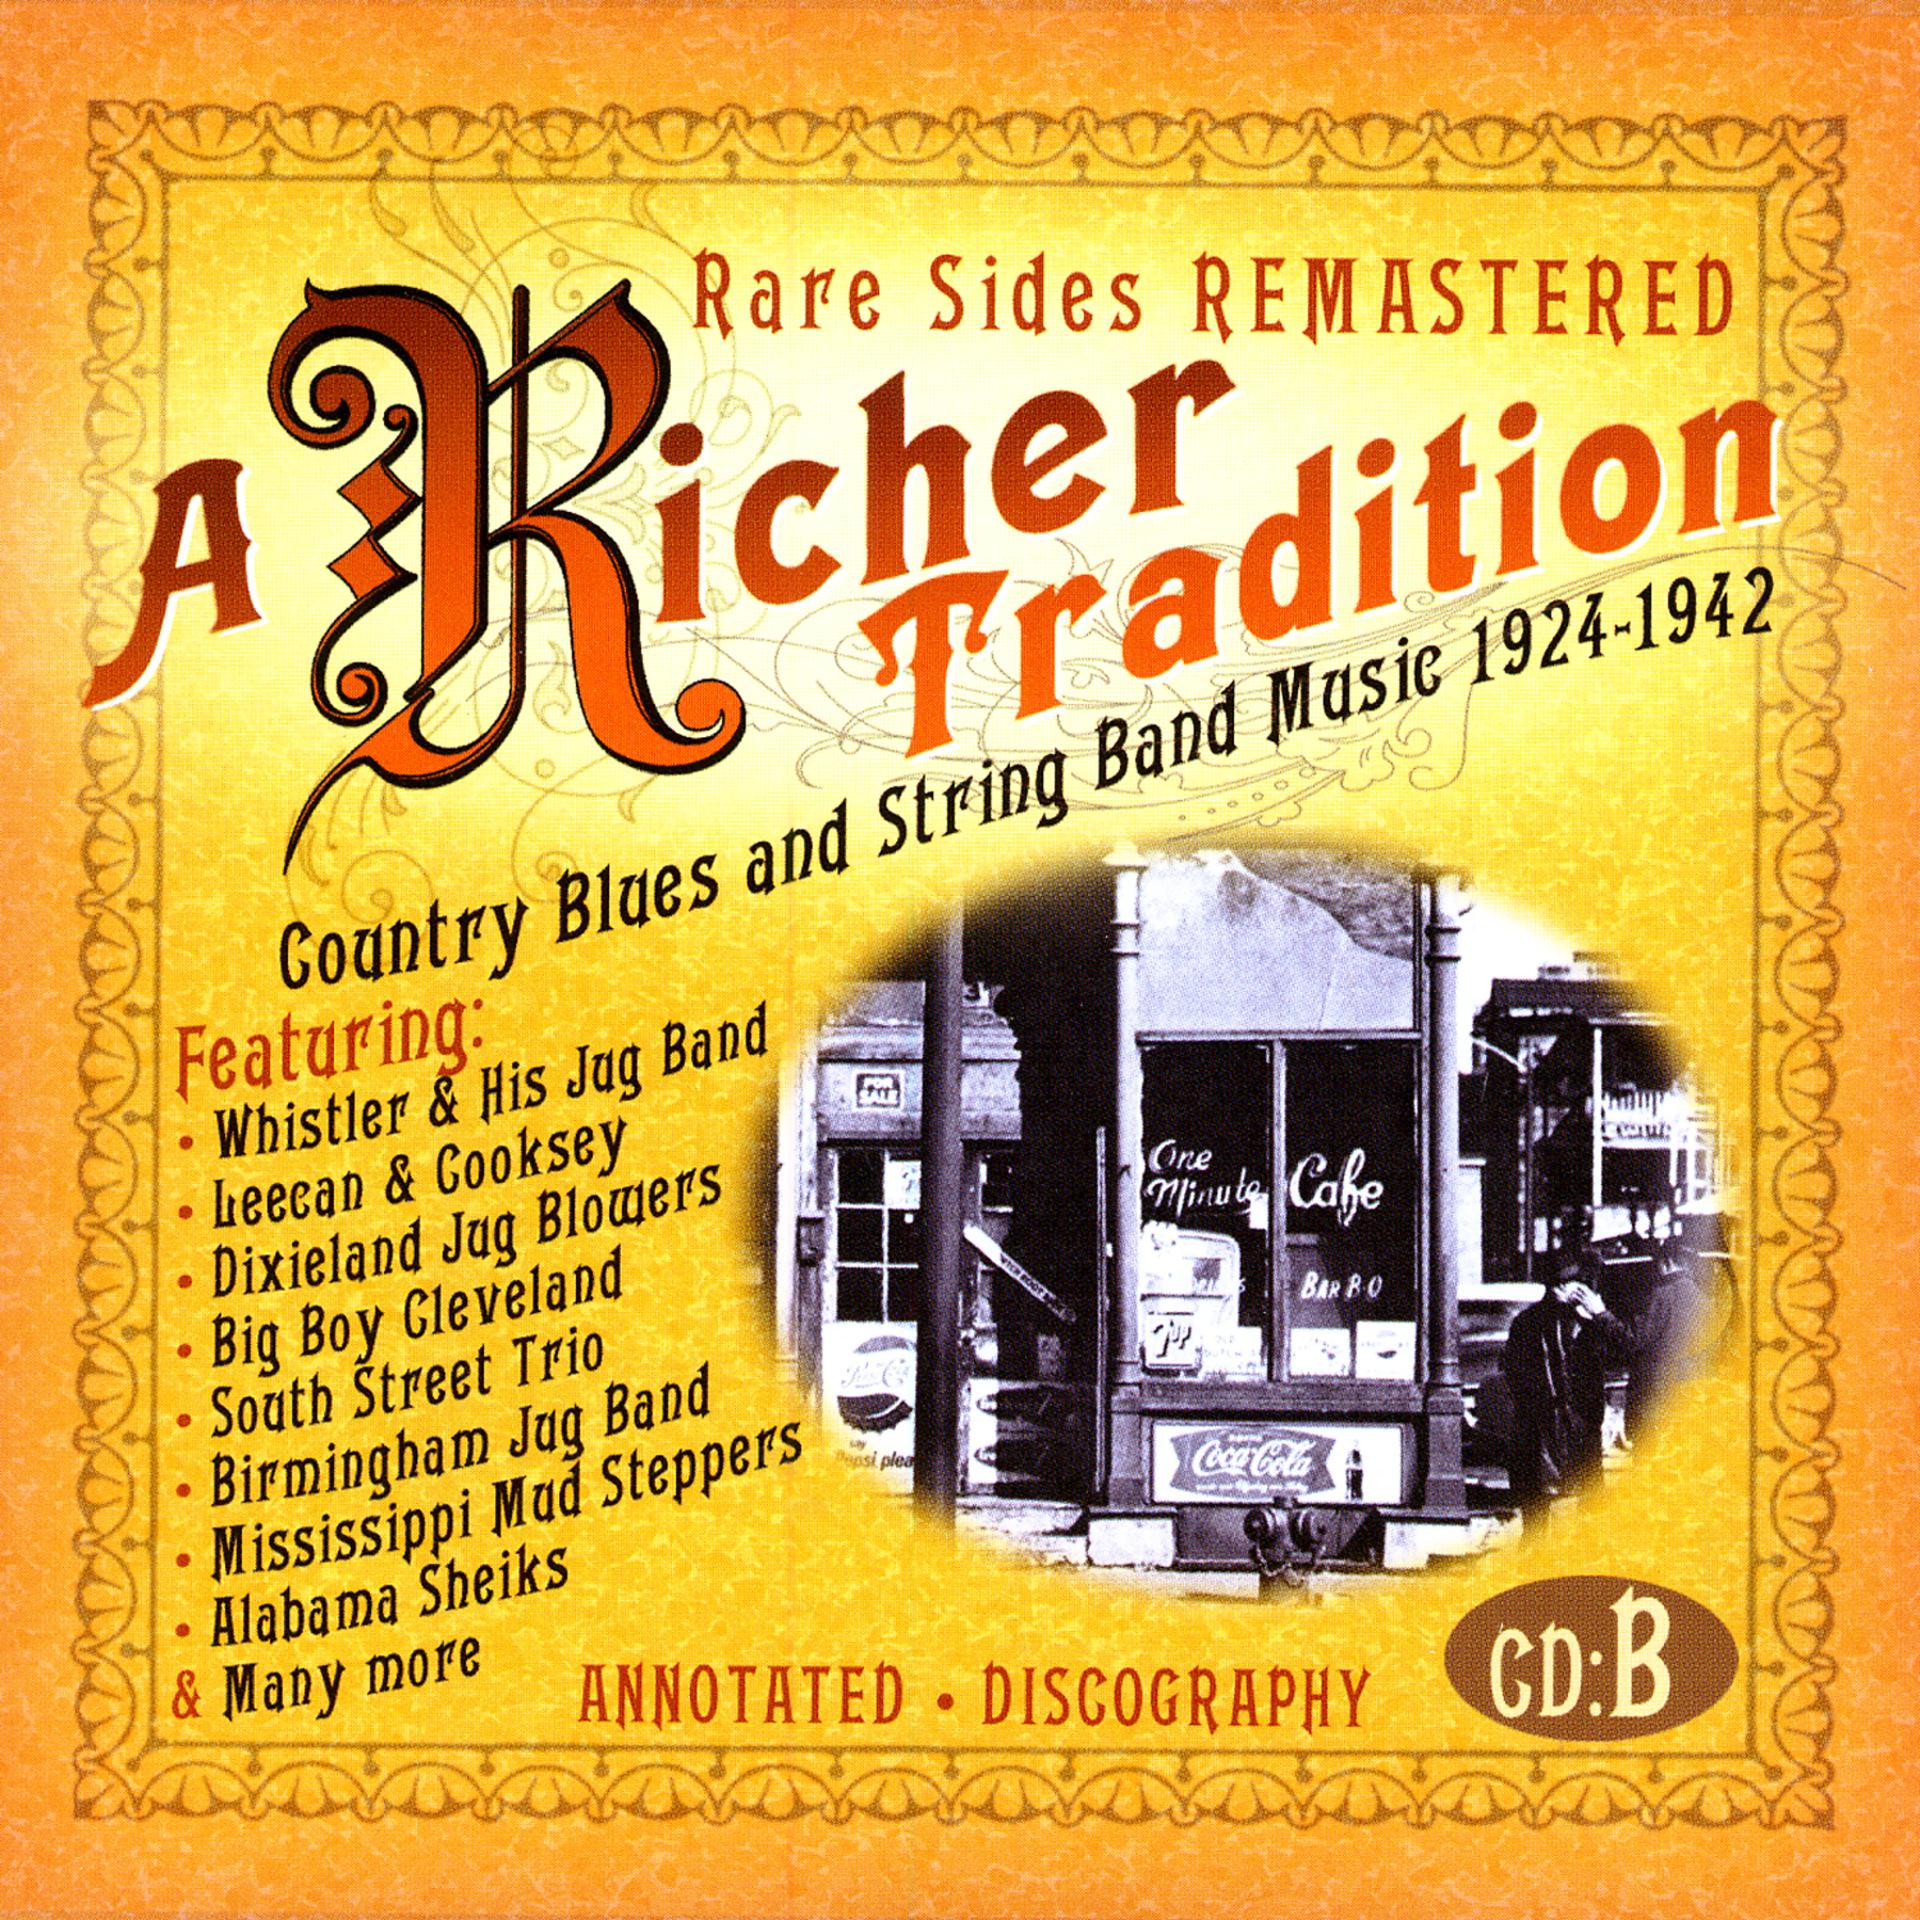 Постер альбома A Richer Tradition - Country Blues & String Band Music, 1923-1937, CD B